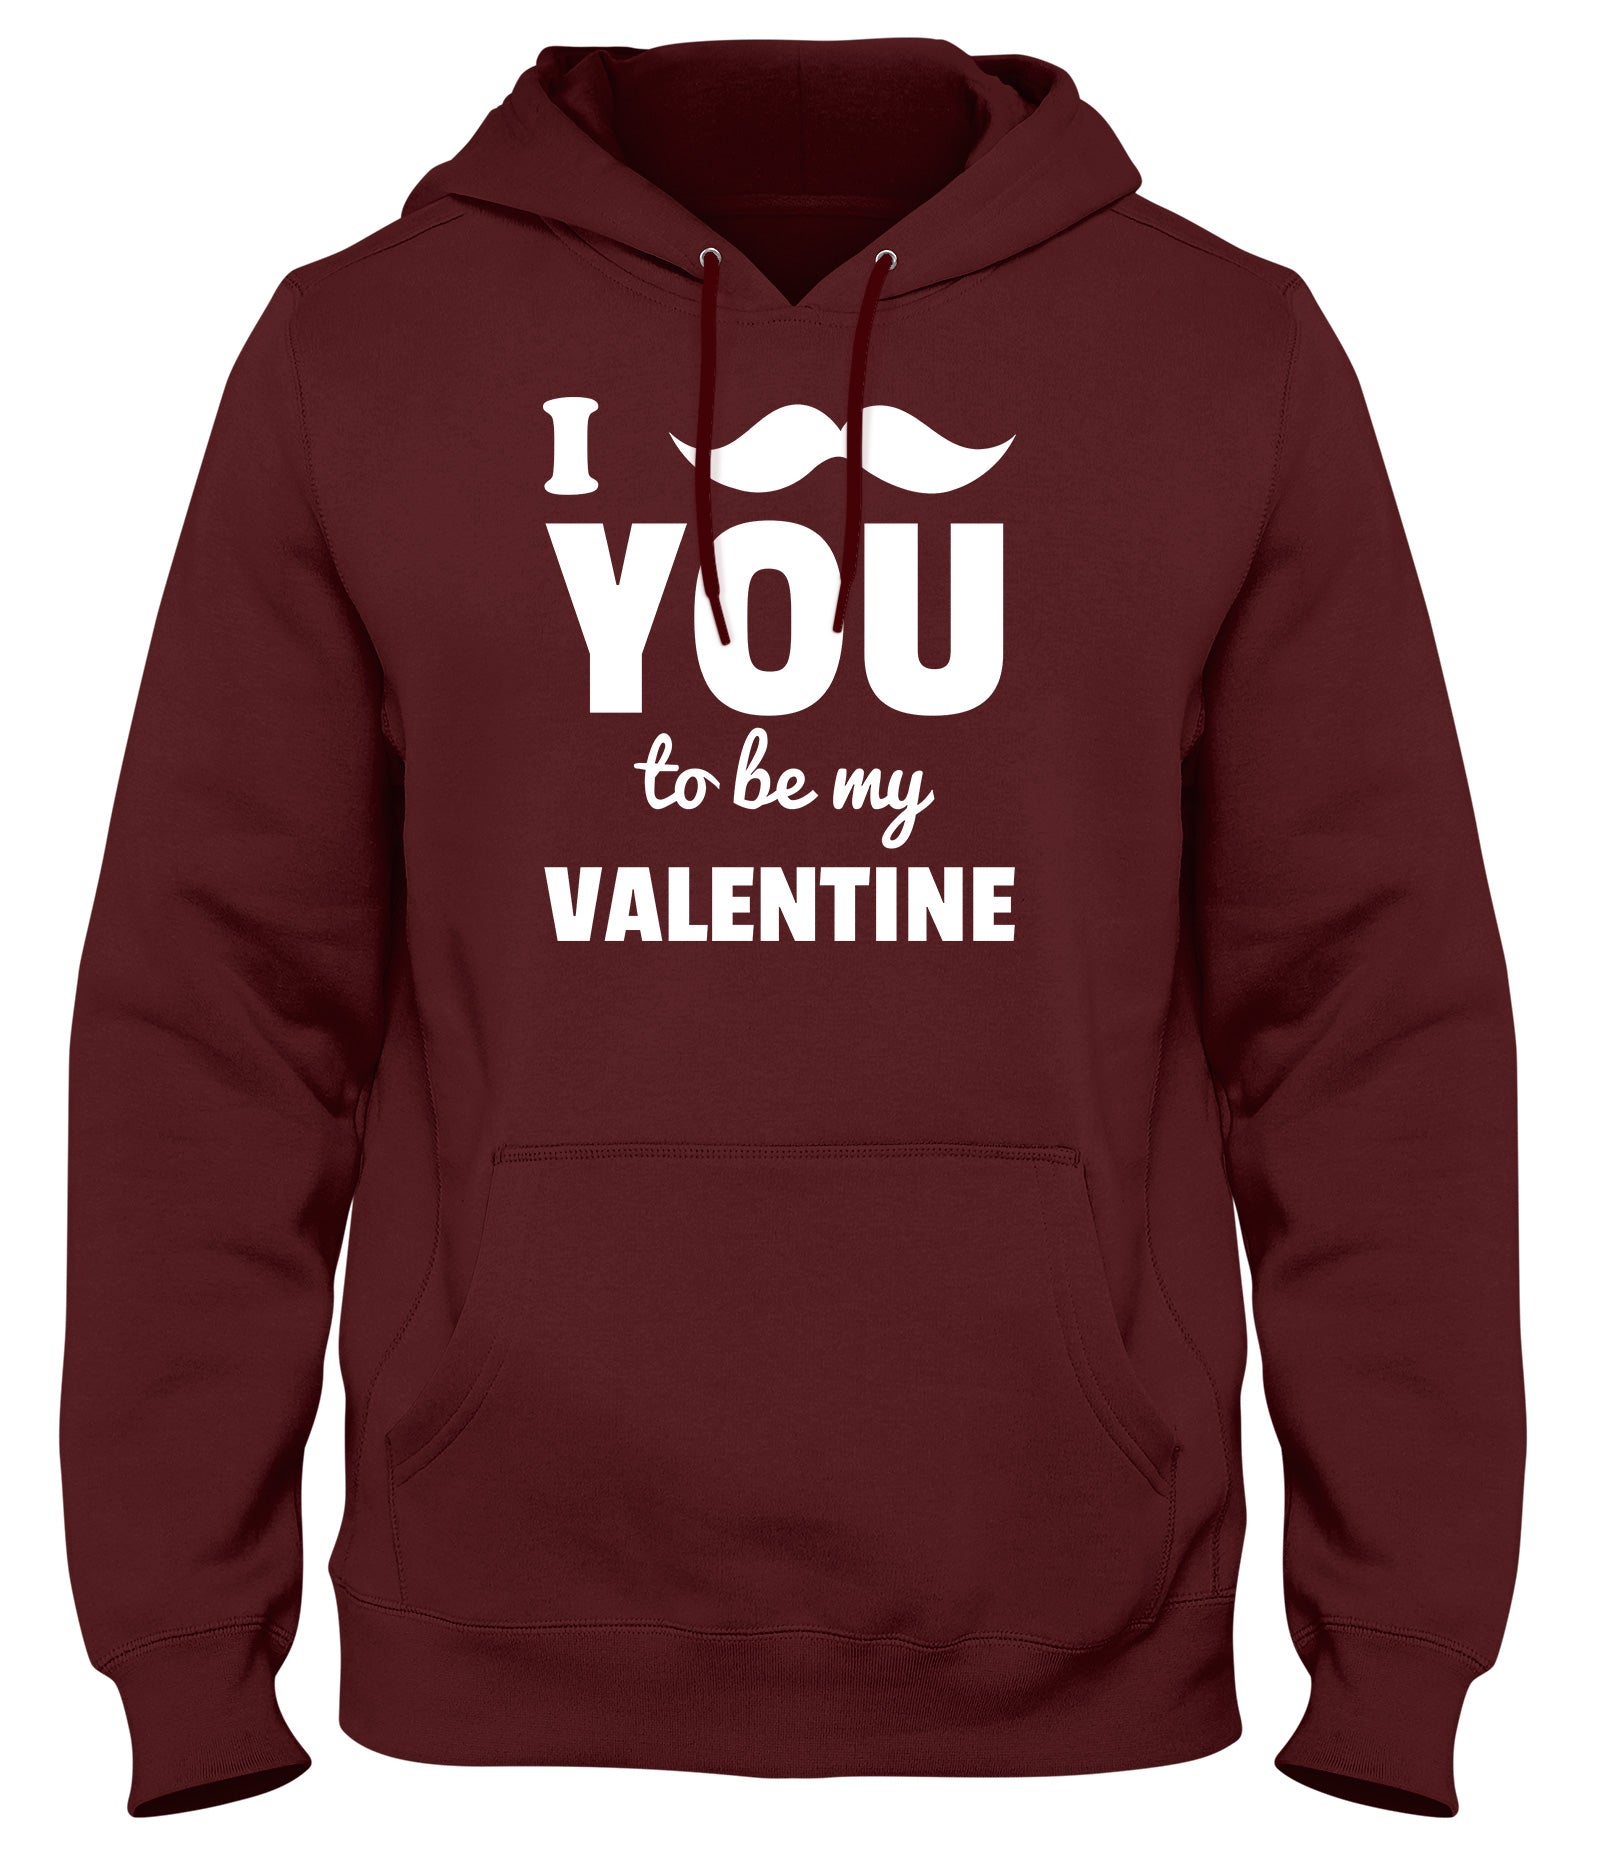 I MOUSTACHE YOU TO BE MY VALENTINE MENS LADIES WOMENS UNISEX HOODIE